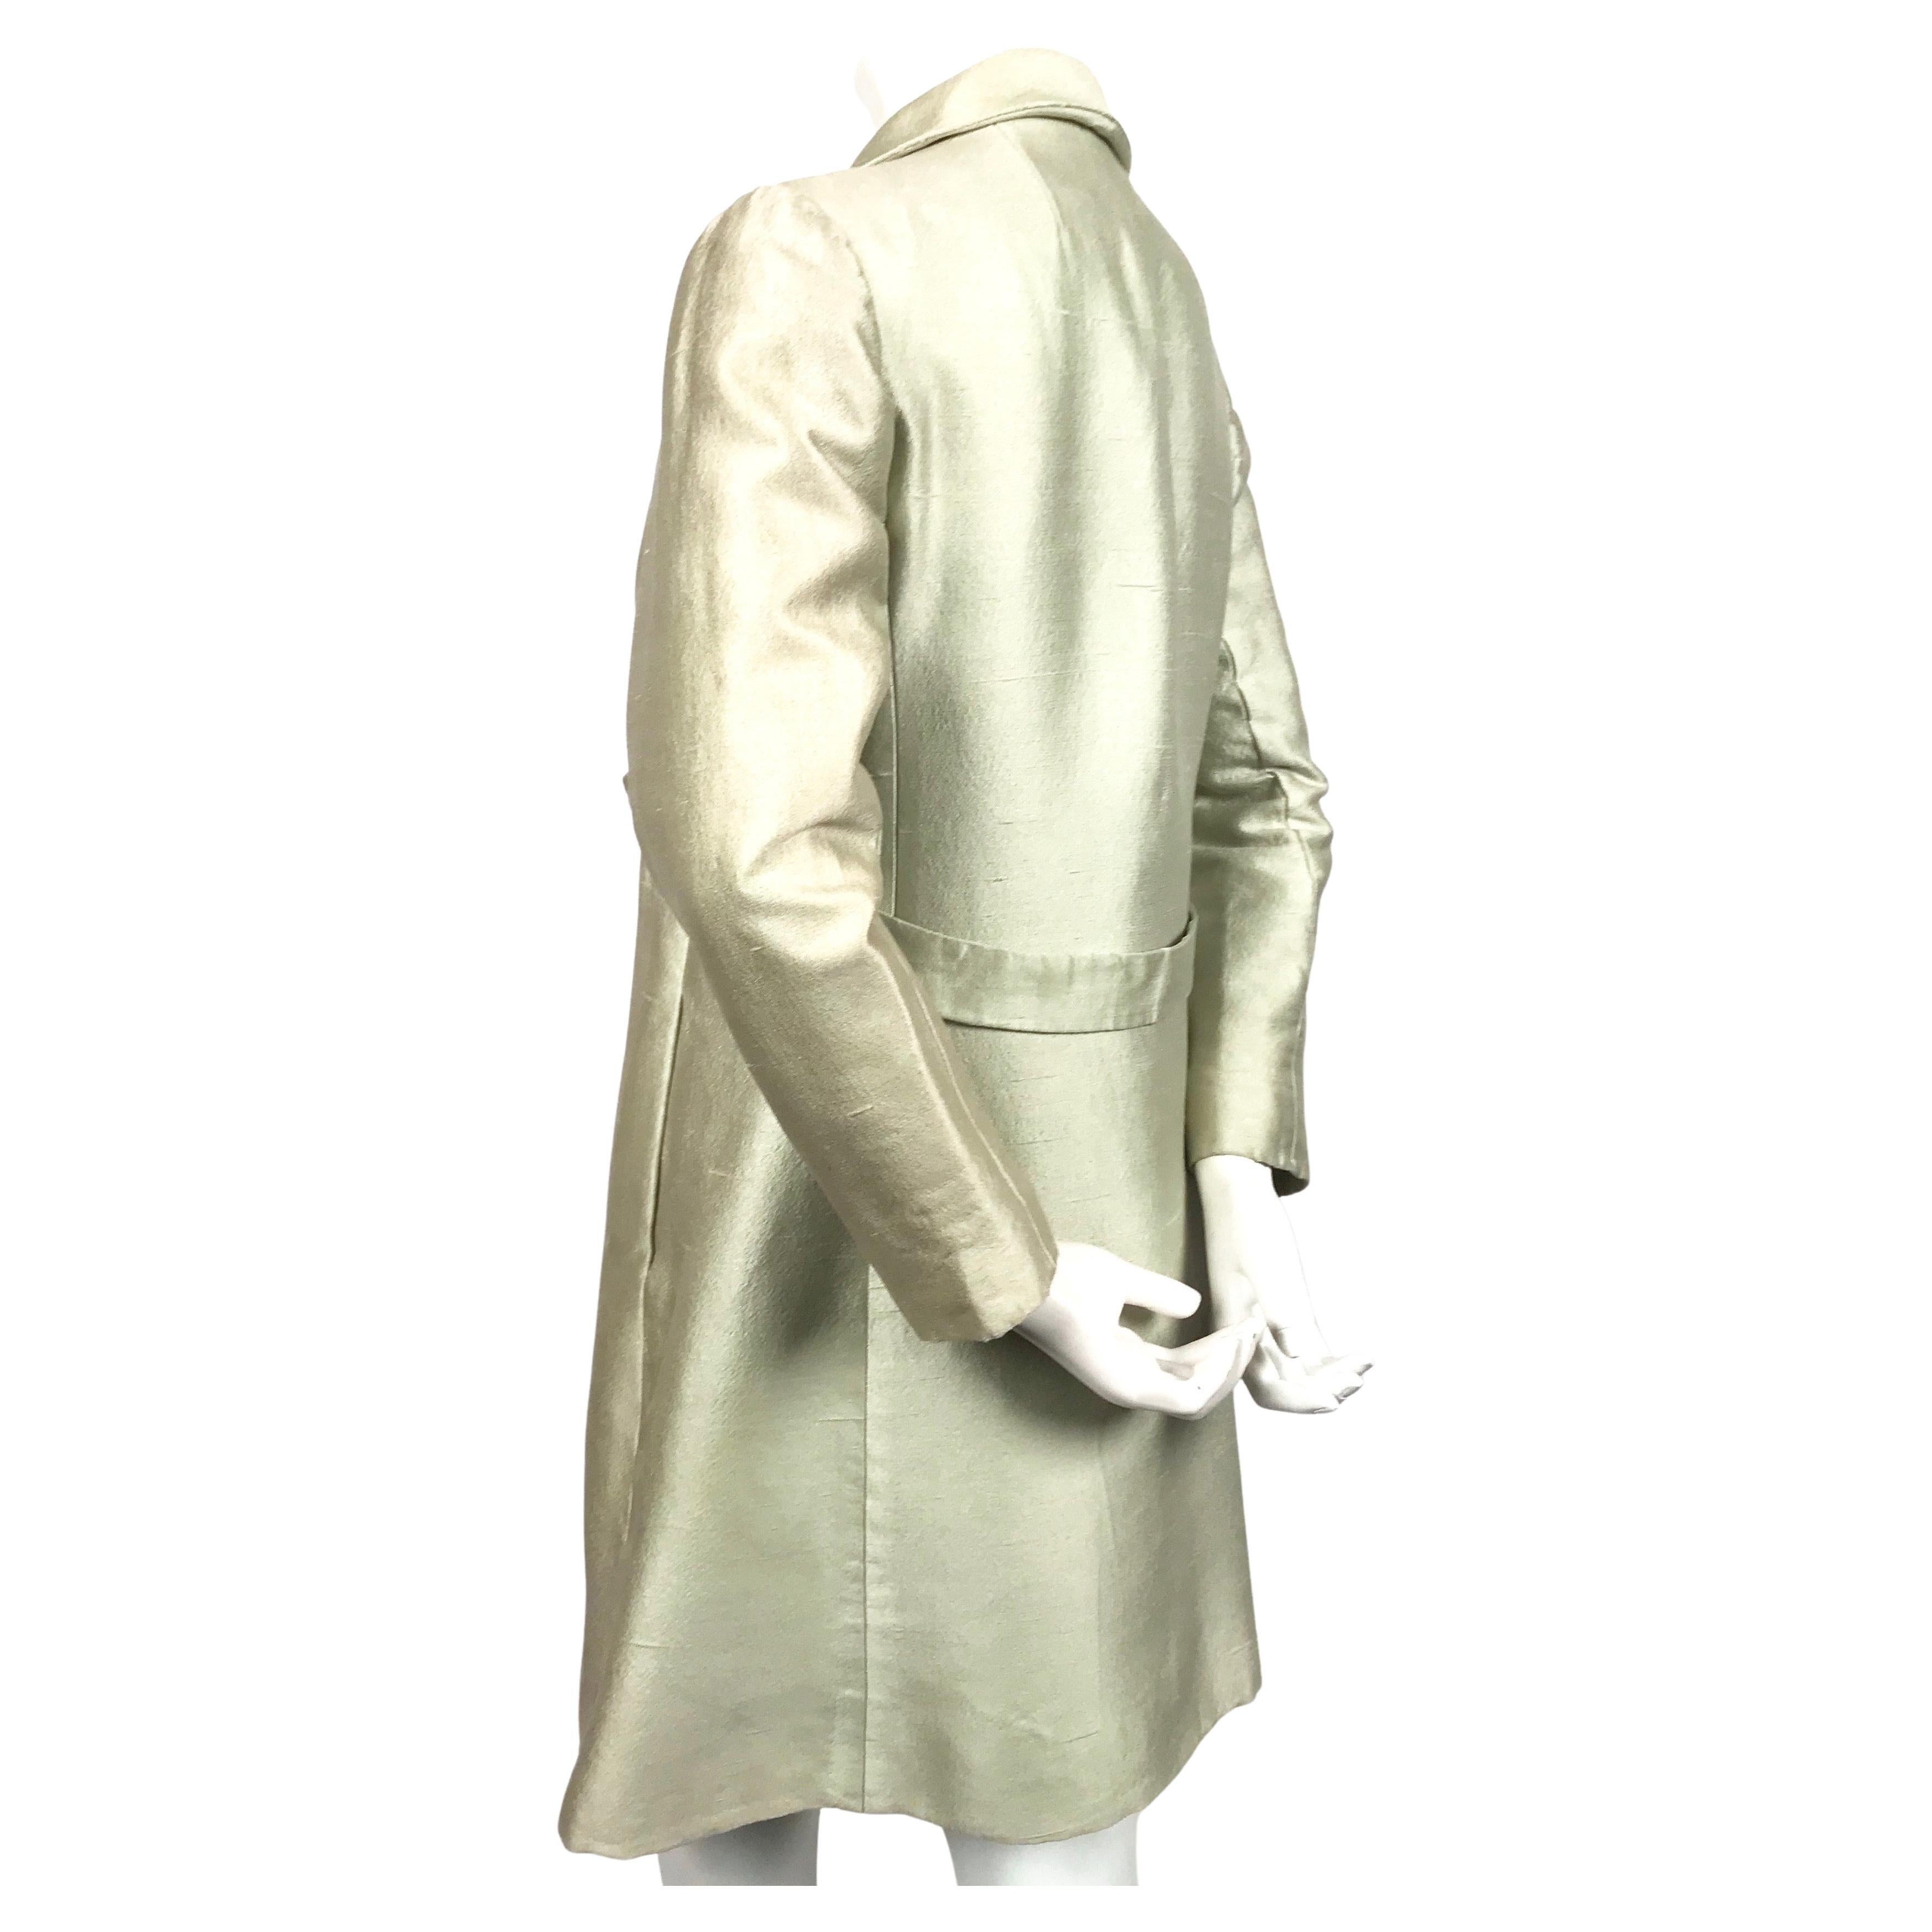 Haute Couture mint-green silk coat designed by Cristobal Balenciaga for Eisa dating to the 1960's.

Approximate measurements: shoulders 15